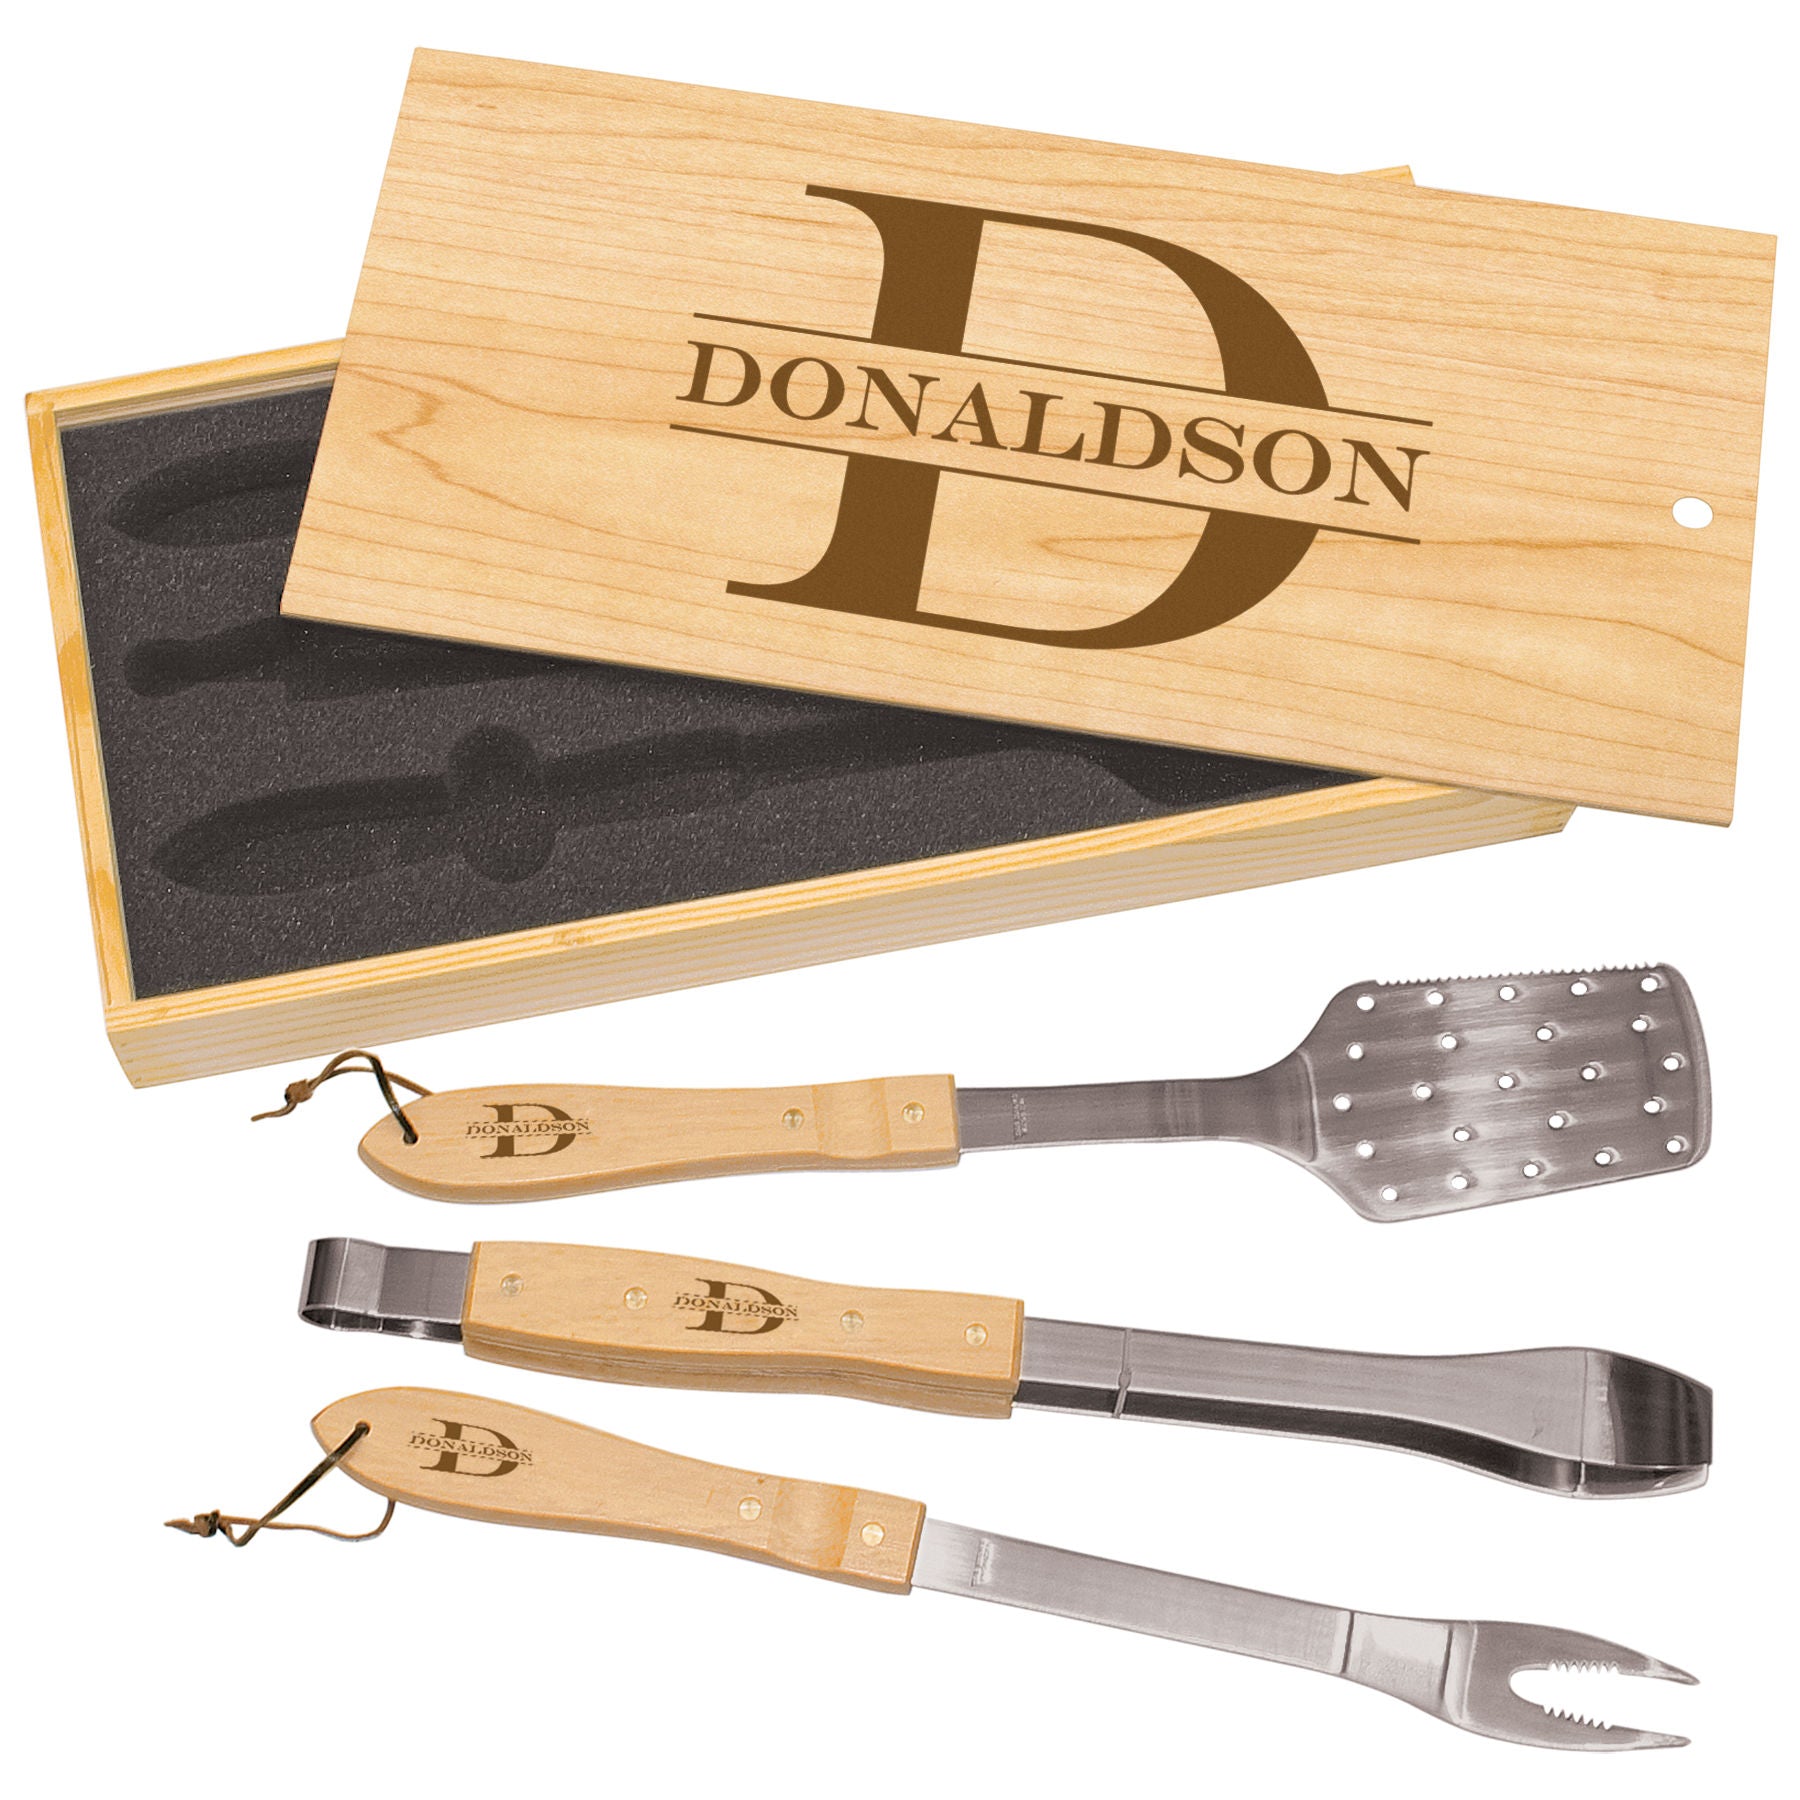 Engraved BBQ Grill Tool Set